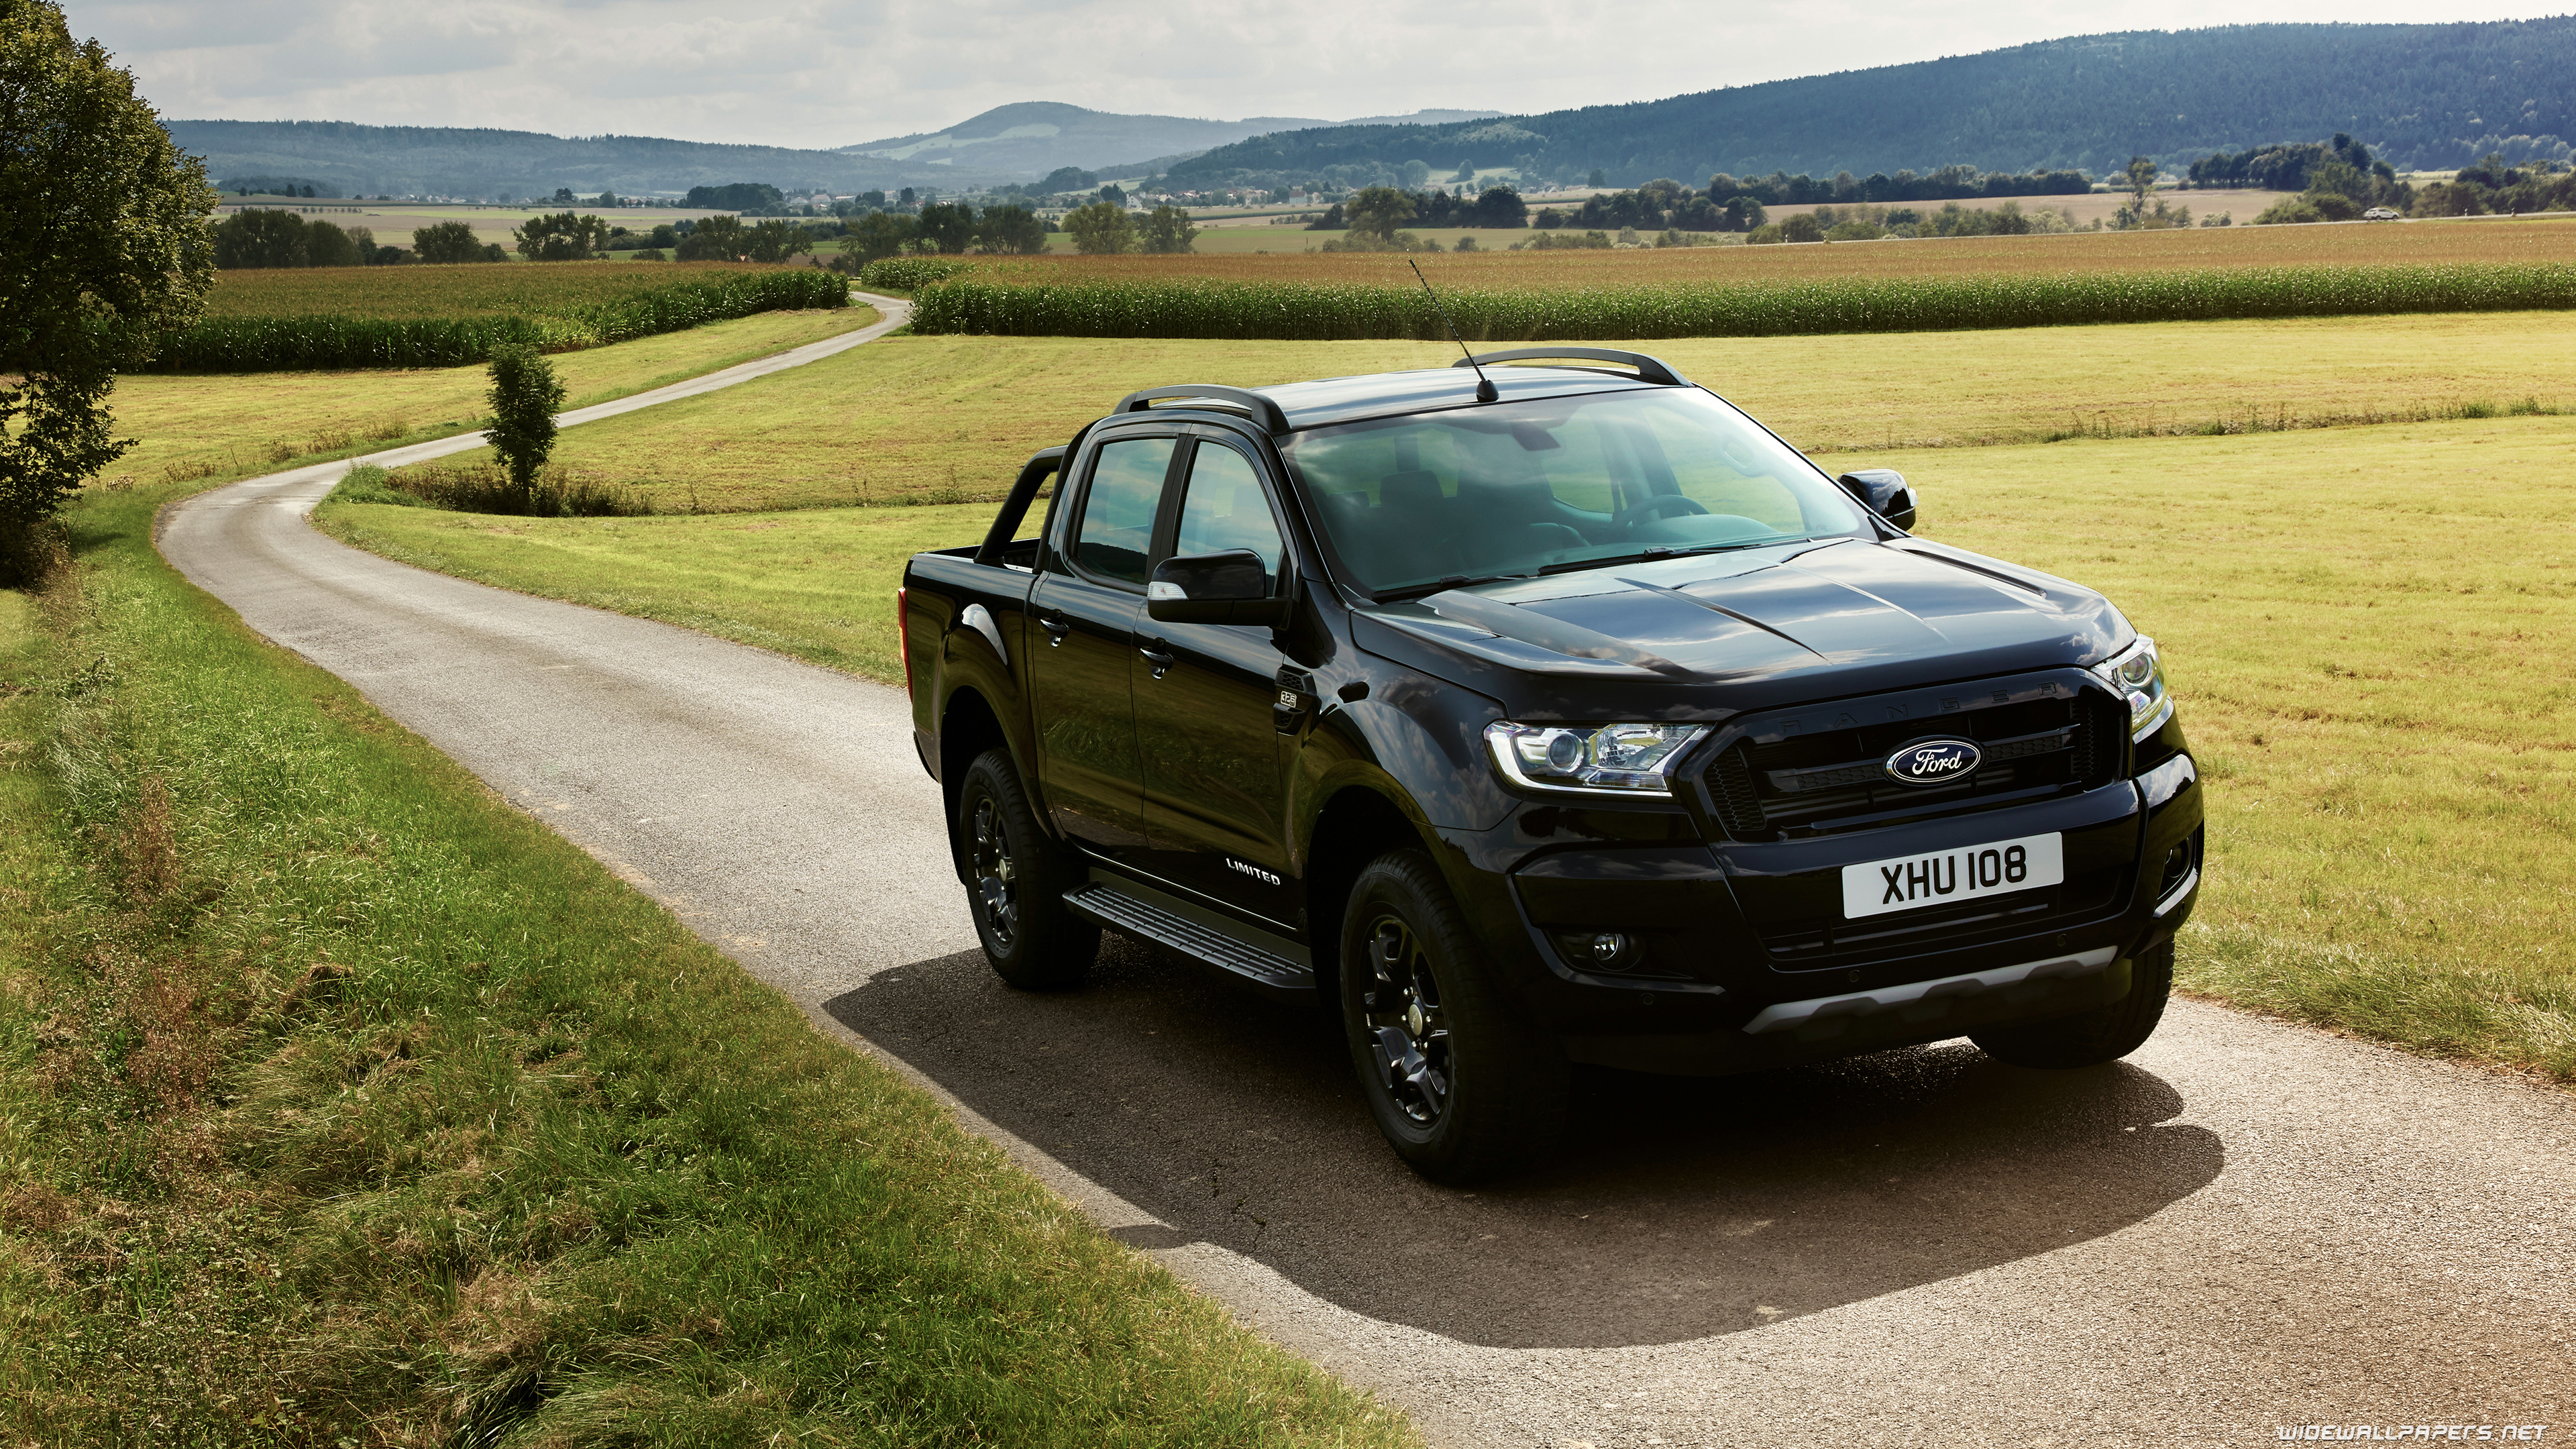 Ford Ranger Black Double Cab Wallpapers